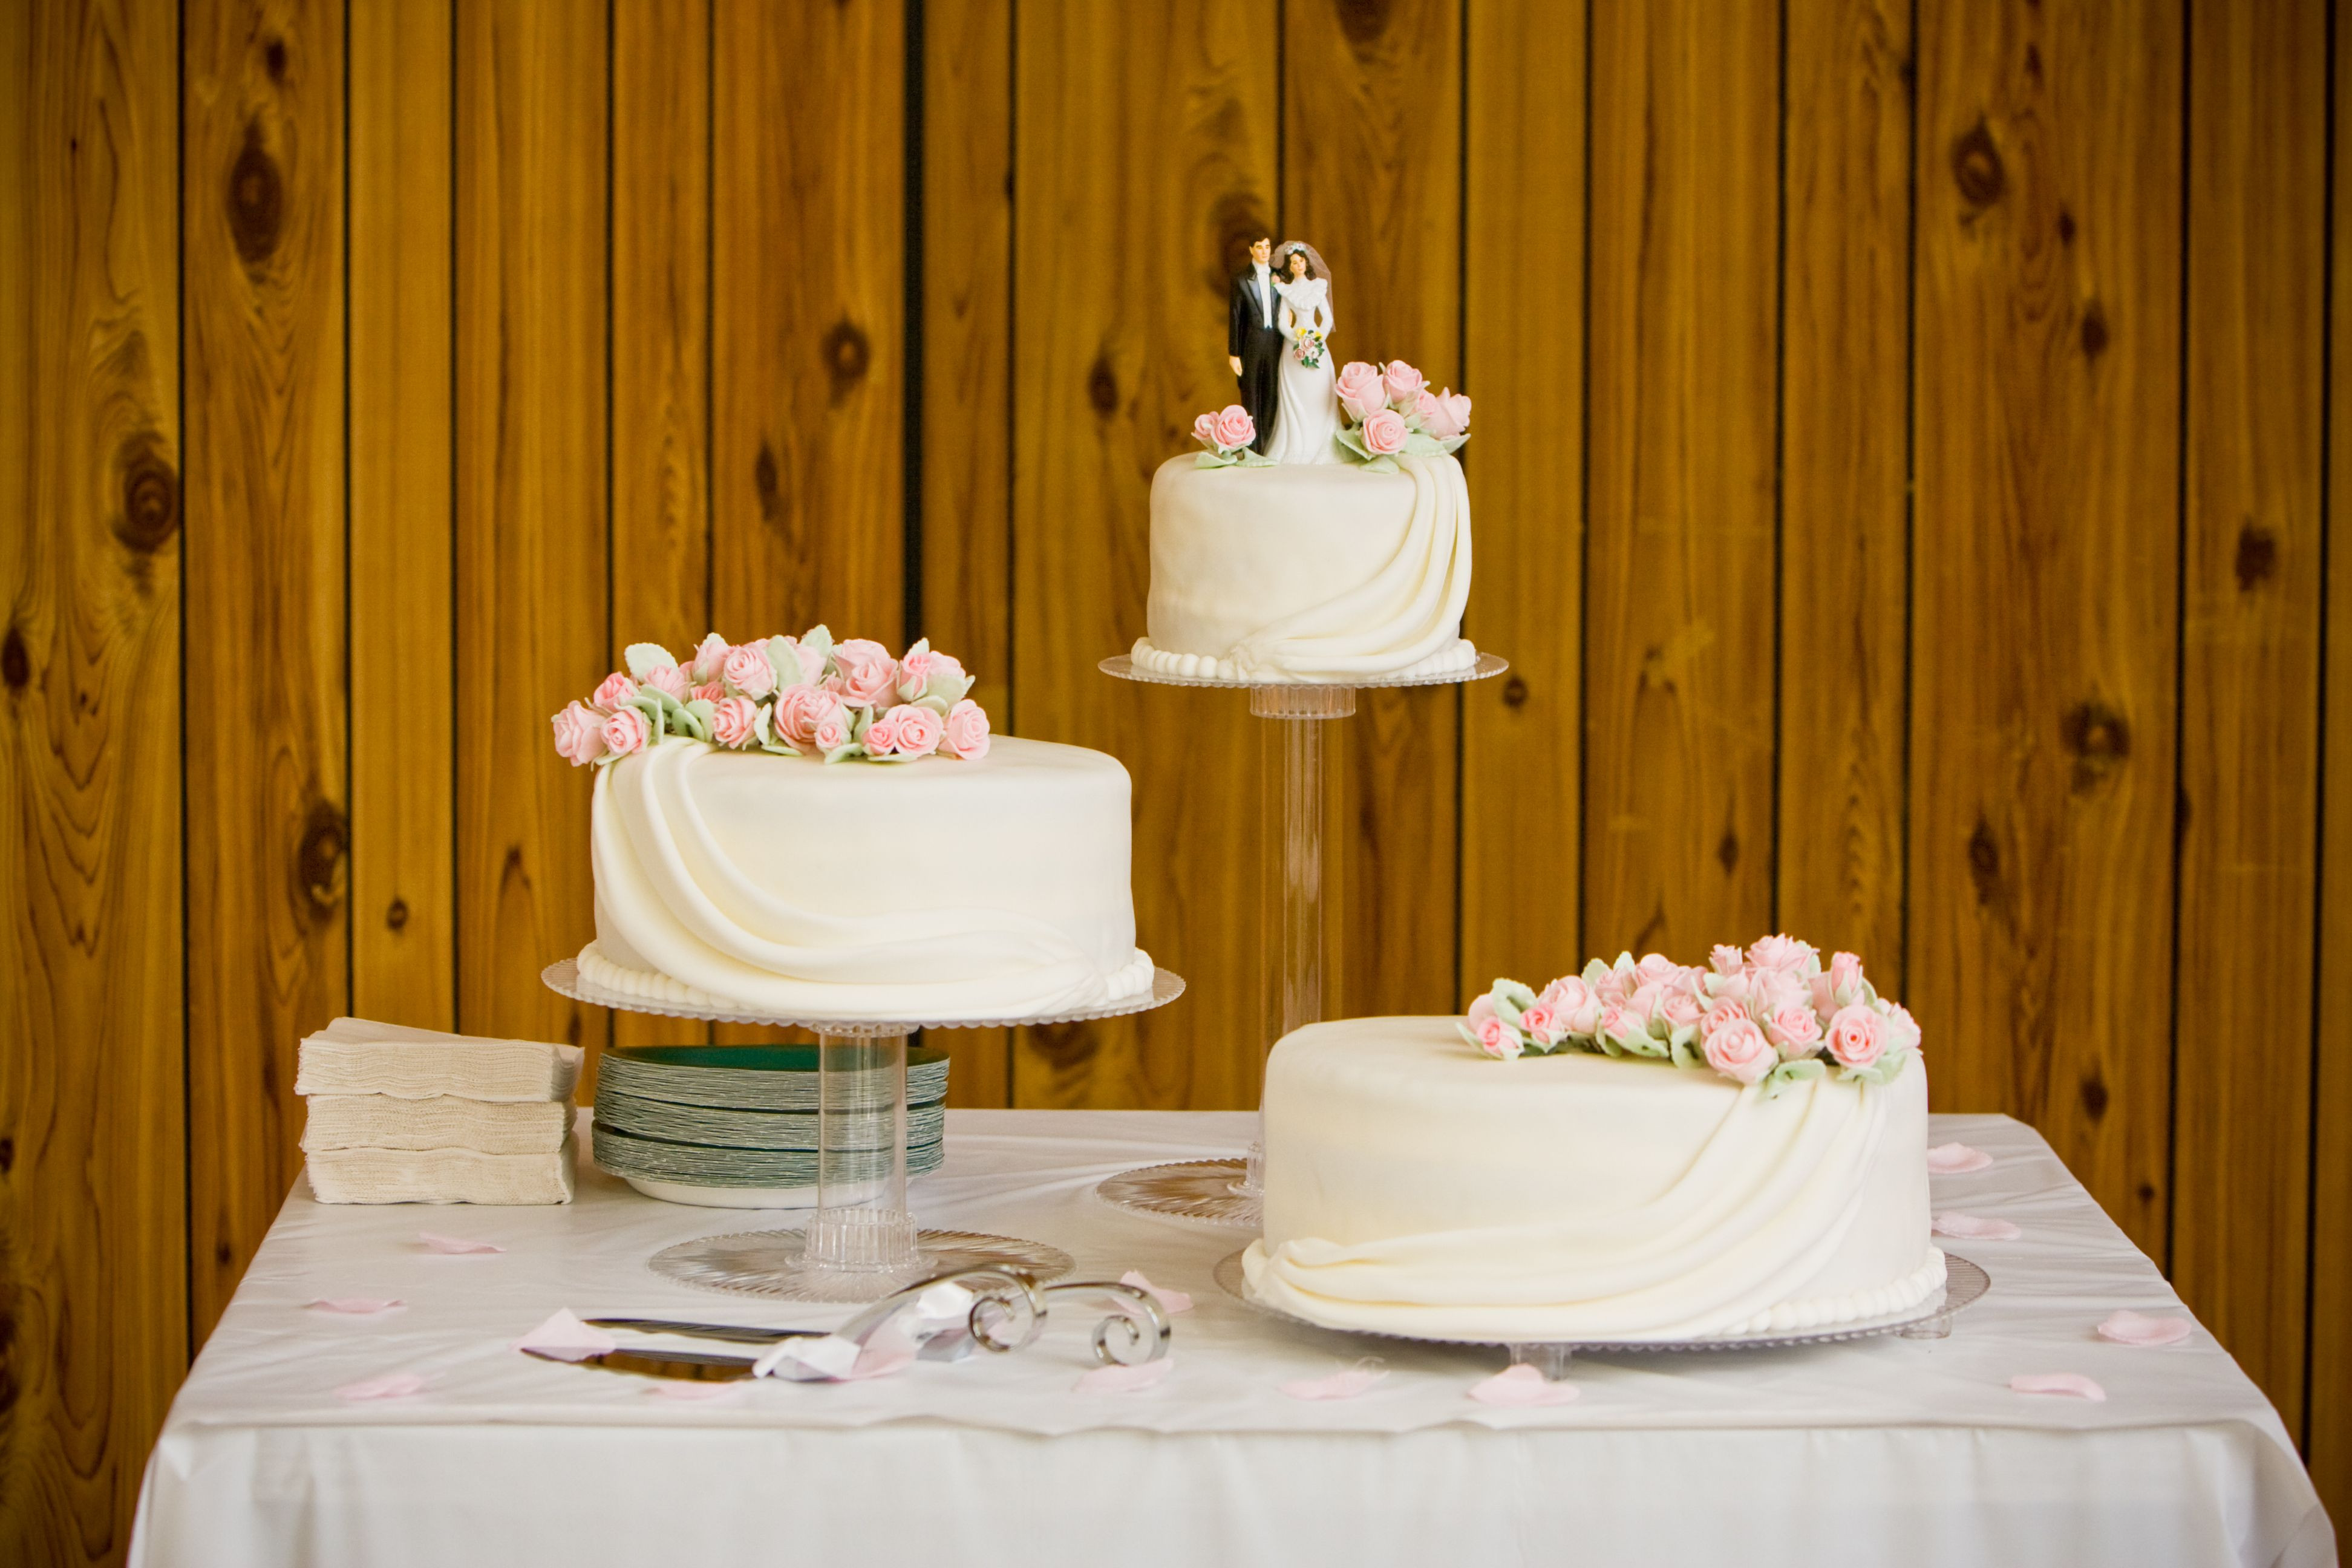 Separate Tier Wedding Cakes the Best Wedding Cakes with Separate Tiers